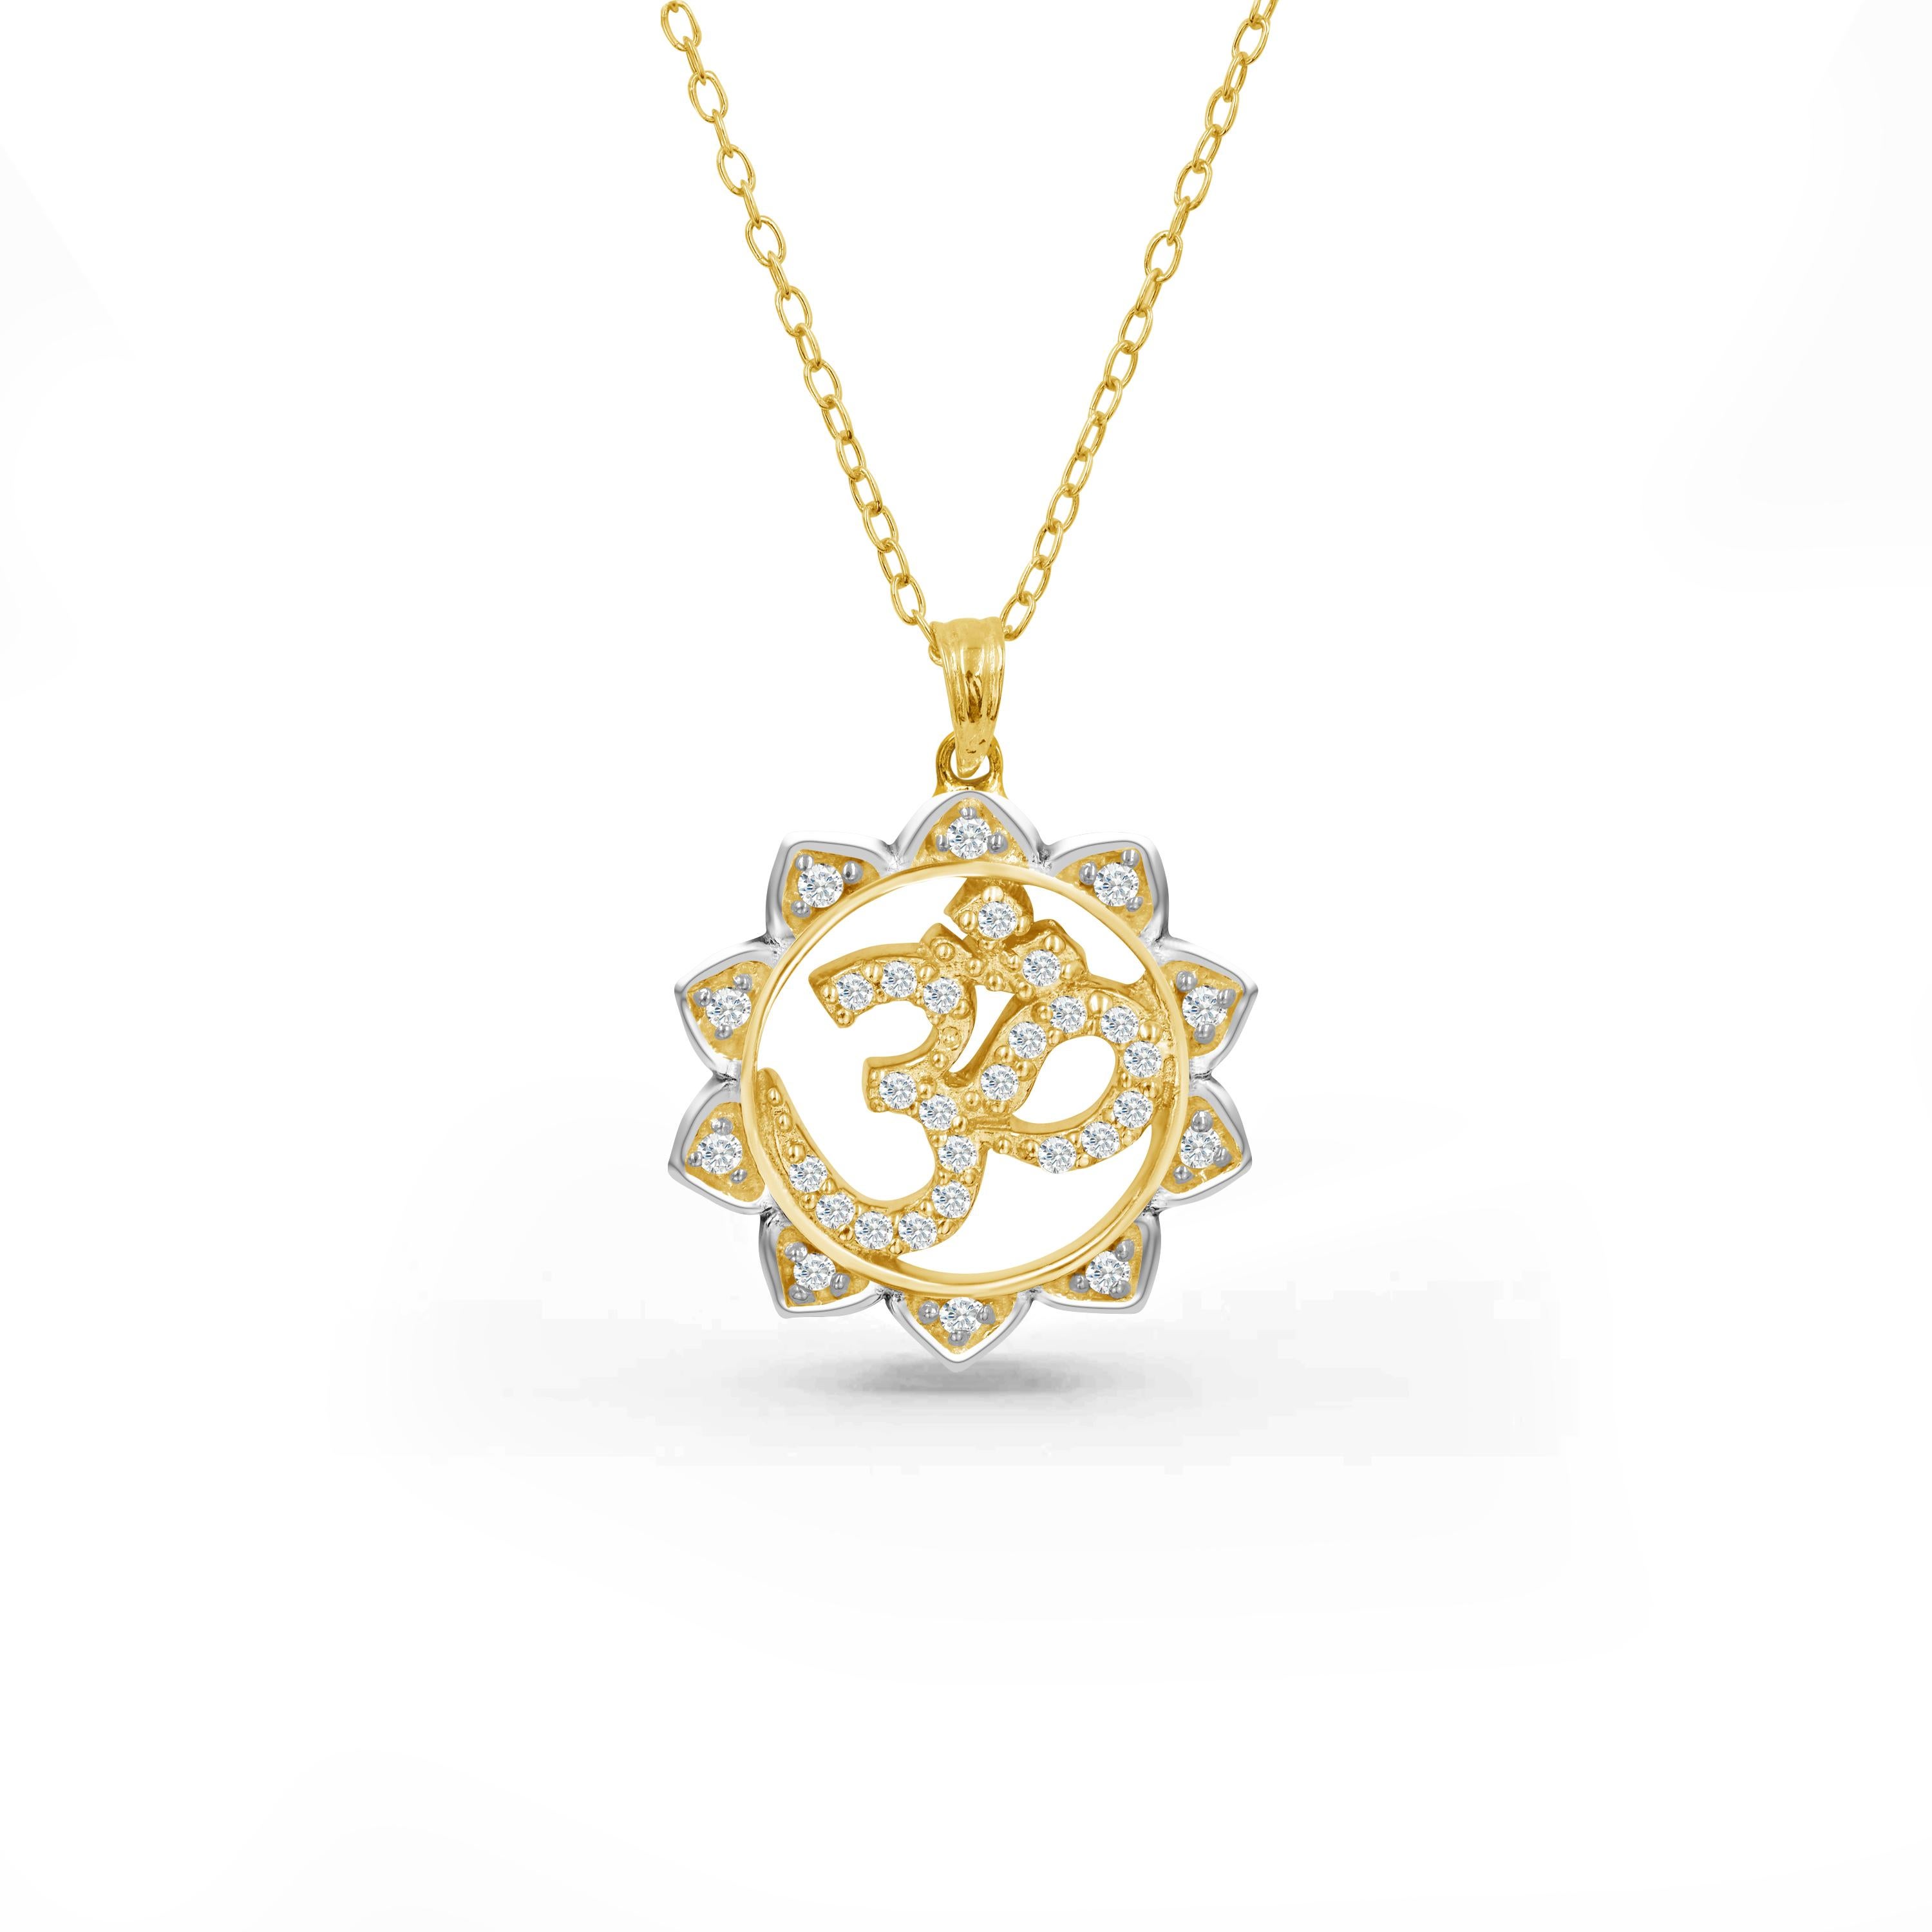 Handcrafted OM diamond necklace is a perfect everyday wear necklace to bring inner peace and spirituality. This beautiful Hindu religious OM necklace is surrounded by lotus leaf petals which makes it a Beautiful and enchanting piece. This Hindu